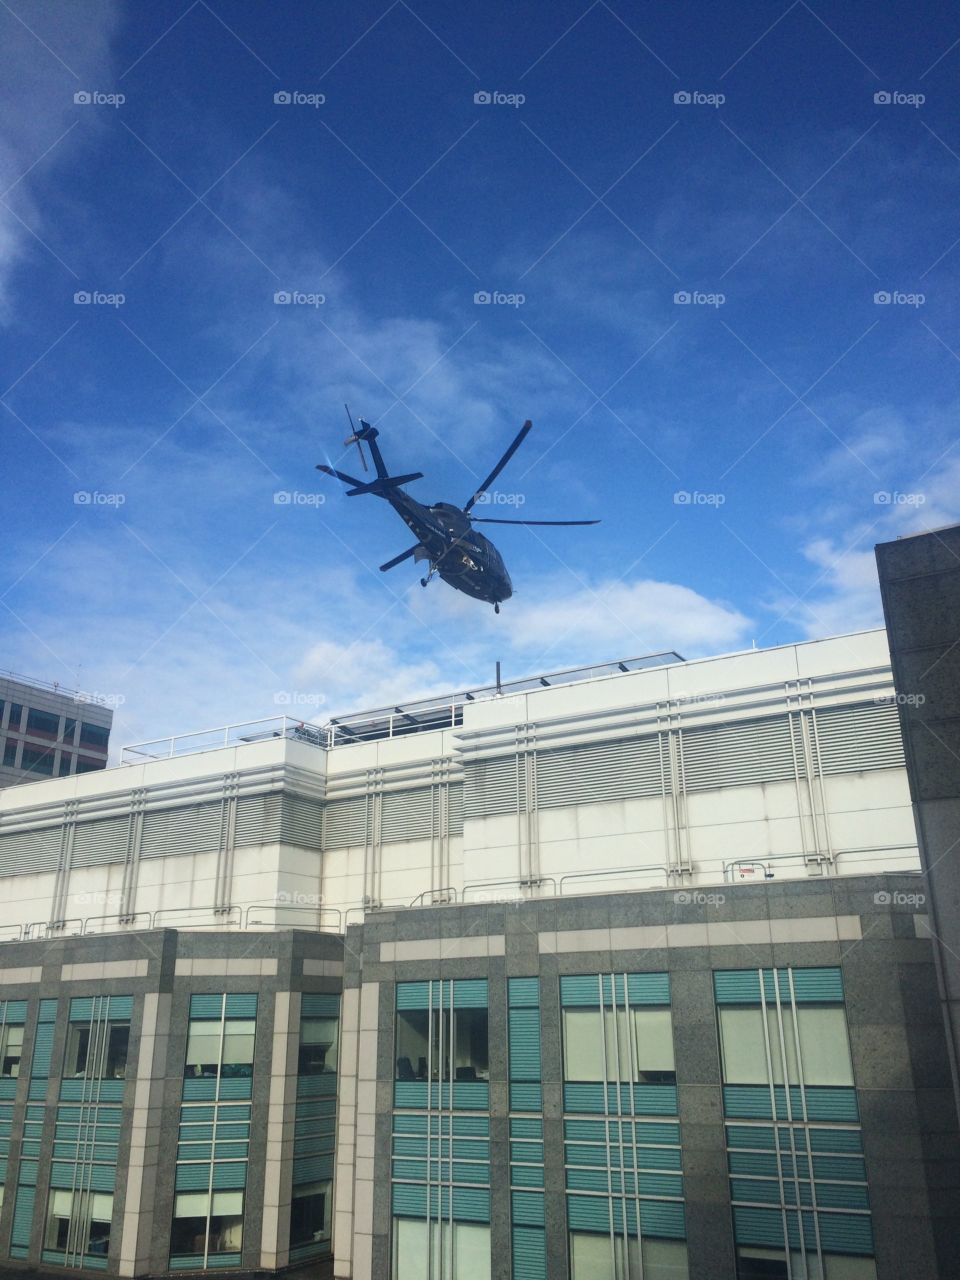 Hospital Helicopter 